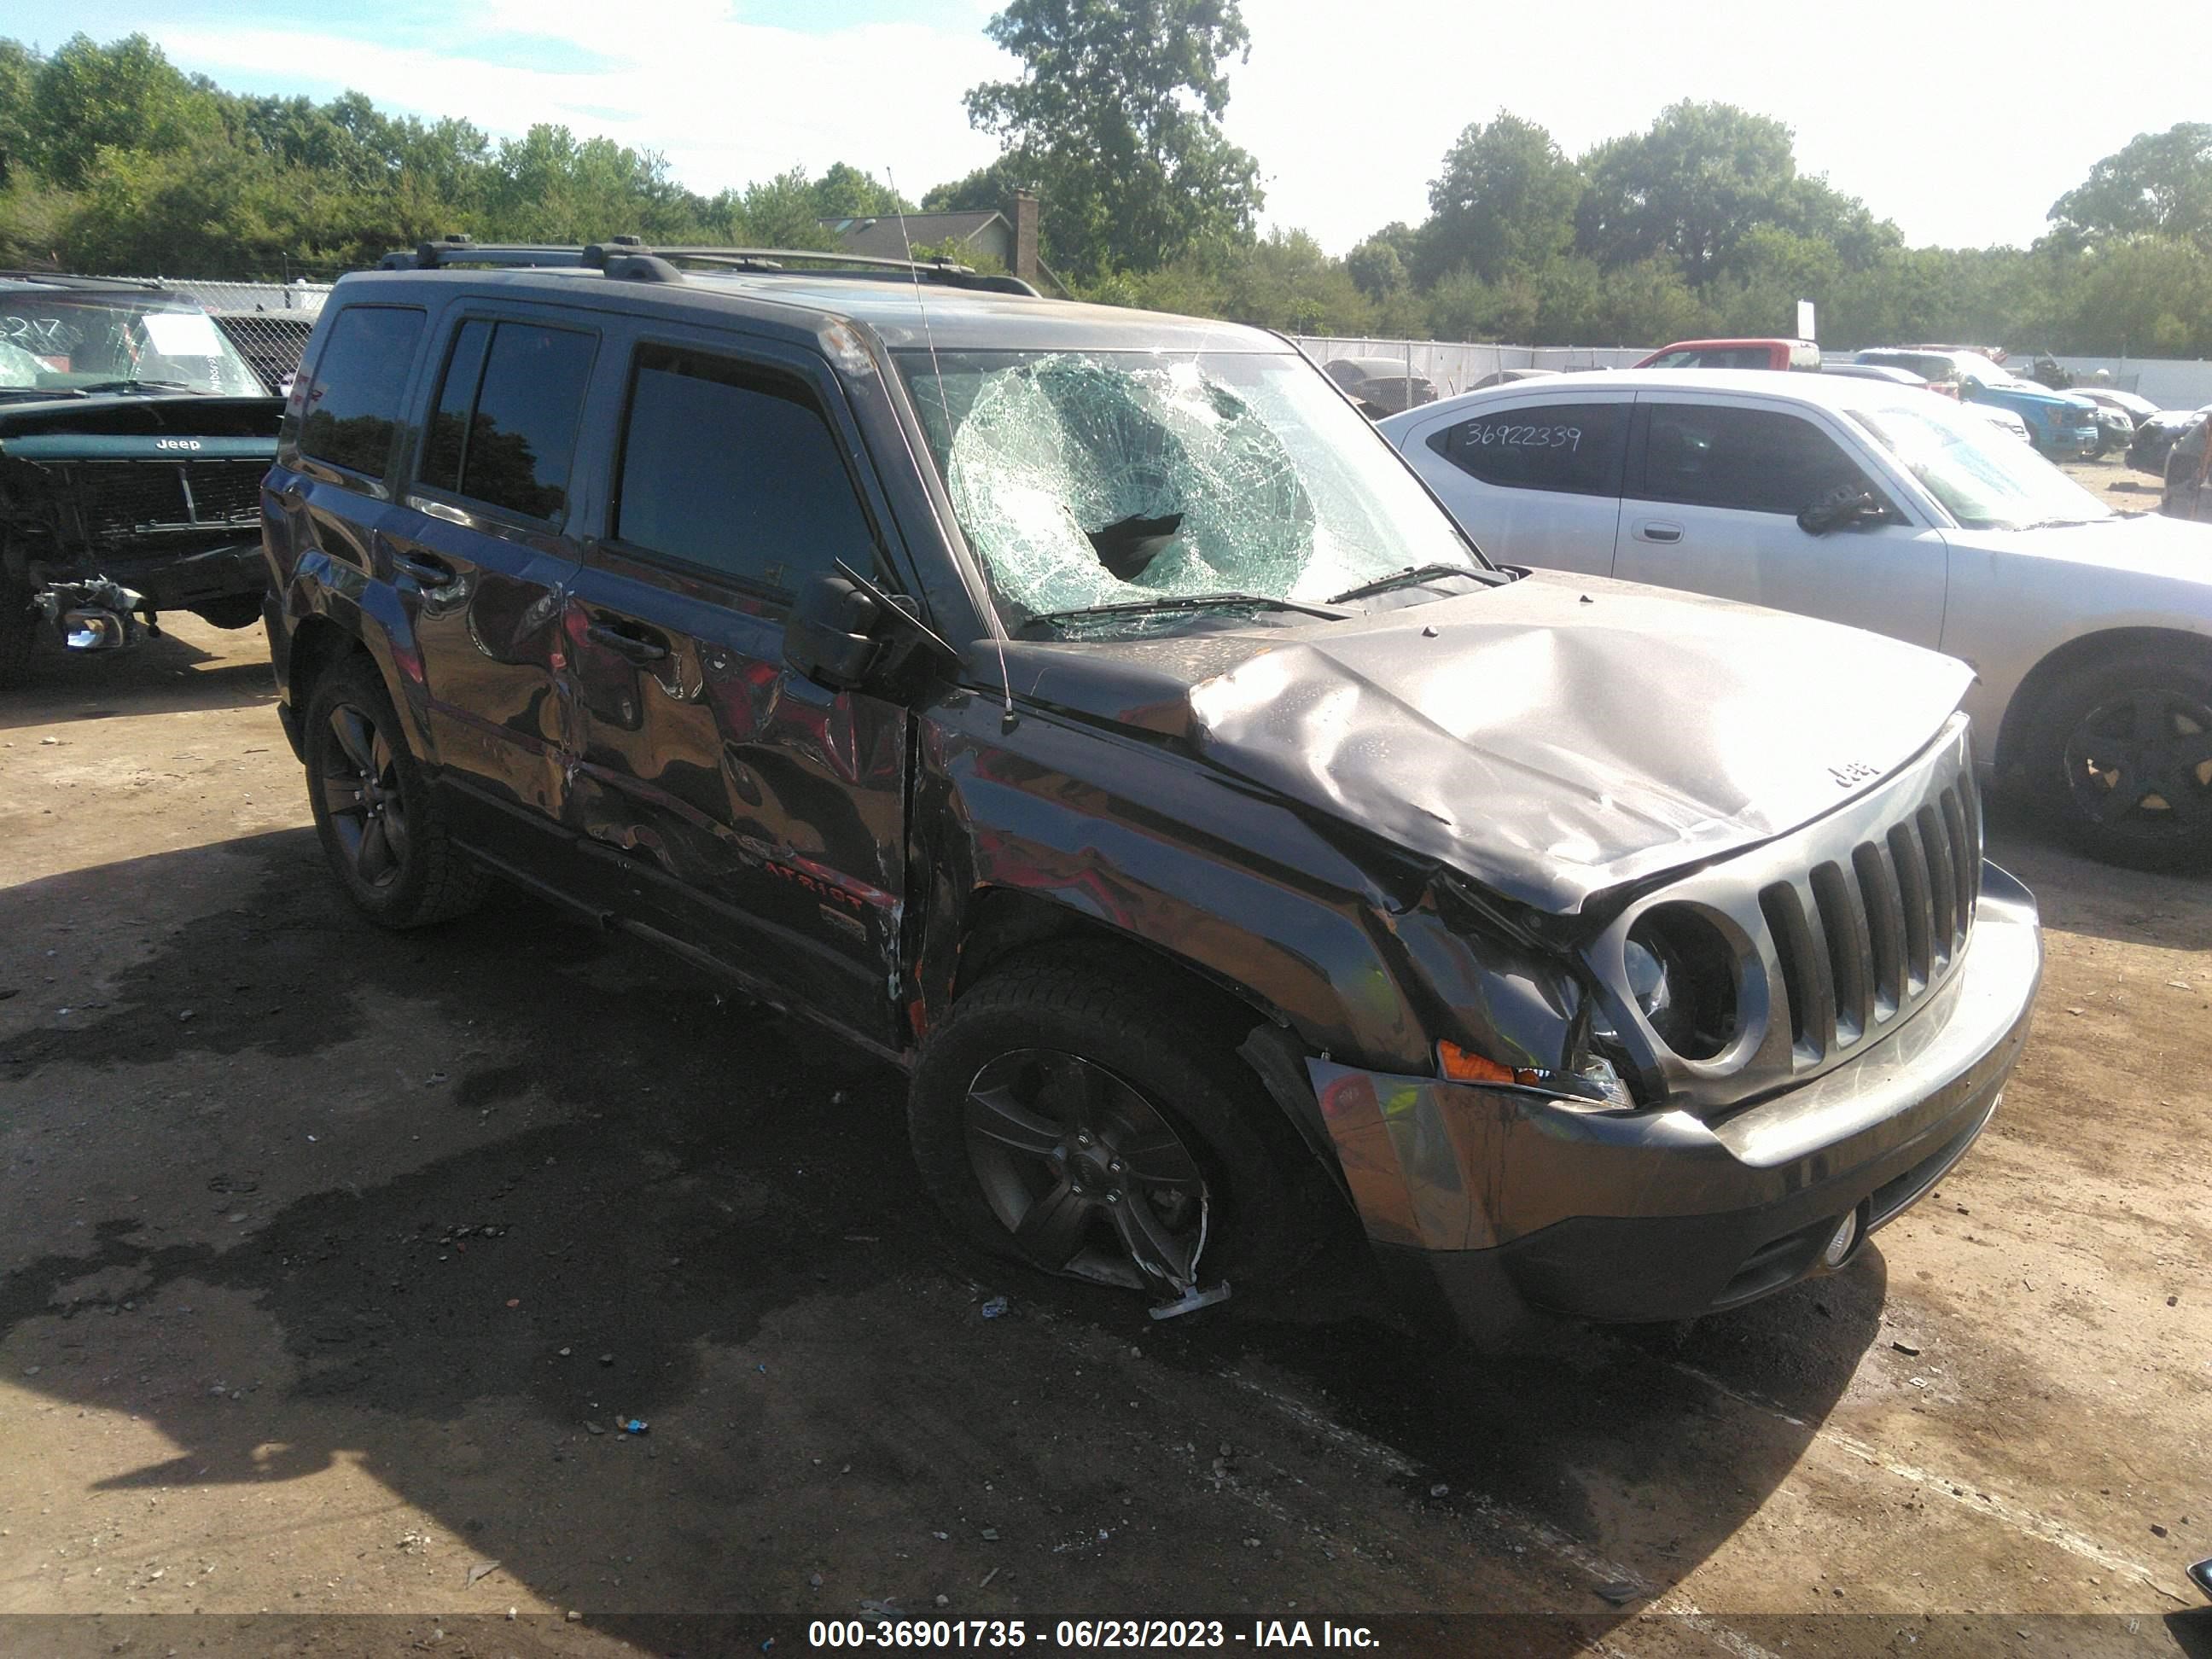 vin: 1C4NJPBB4GD803844 1C4NJPBB4GD803844 2016 jeep liberty (patriot) 2400 for Sale in 46619, 25631 State Road 2, South Bend, Indiana, USA